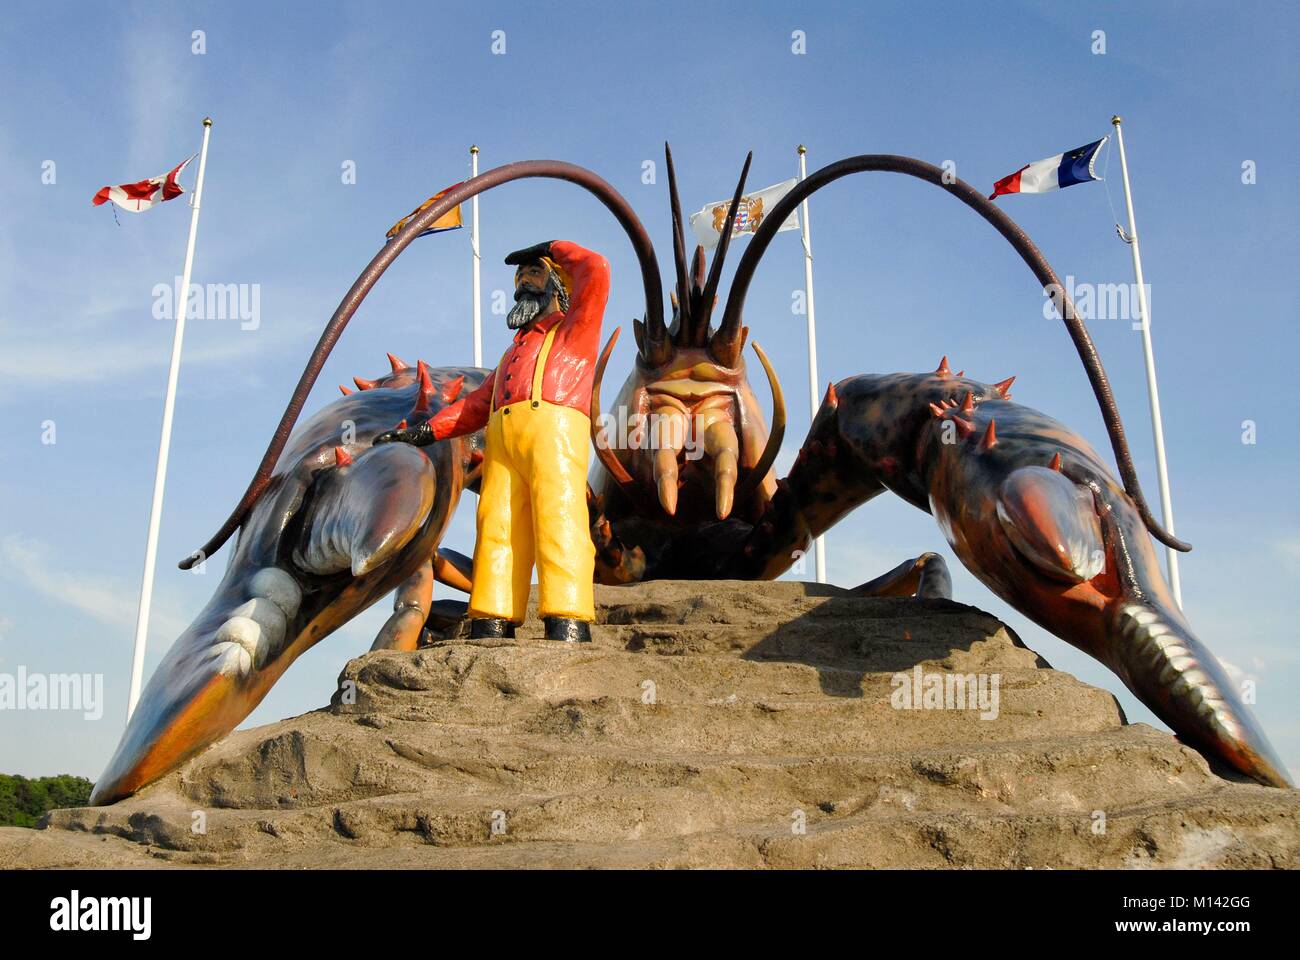 Canada, New Brunswick, Shediac, lobster captial of the world, 10.7m x 5m lobster weighing 82 tonnes, largest lobster in the world Stock Photo